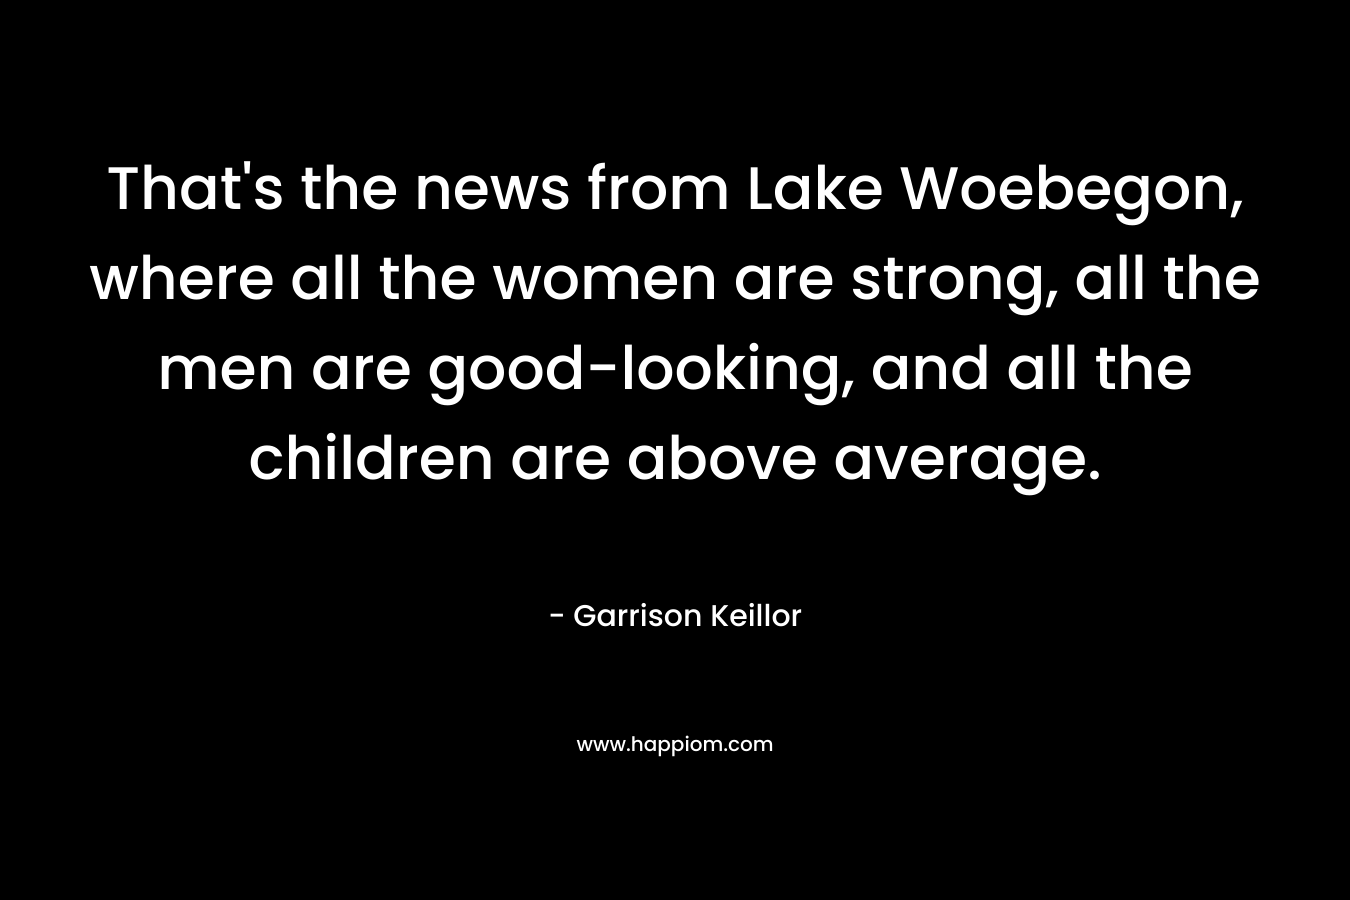 That’s the news from Lake Woebegon, where all the women are strong, all the men are good-looking, and all the children are above average. – Garrison Keillor